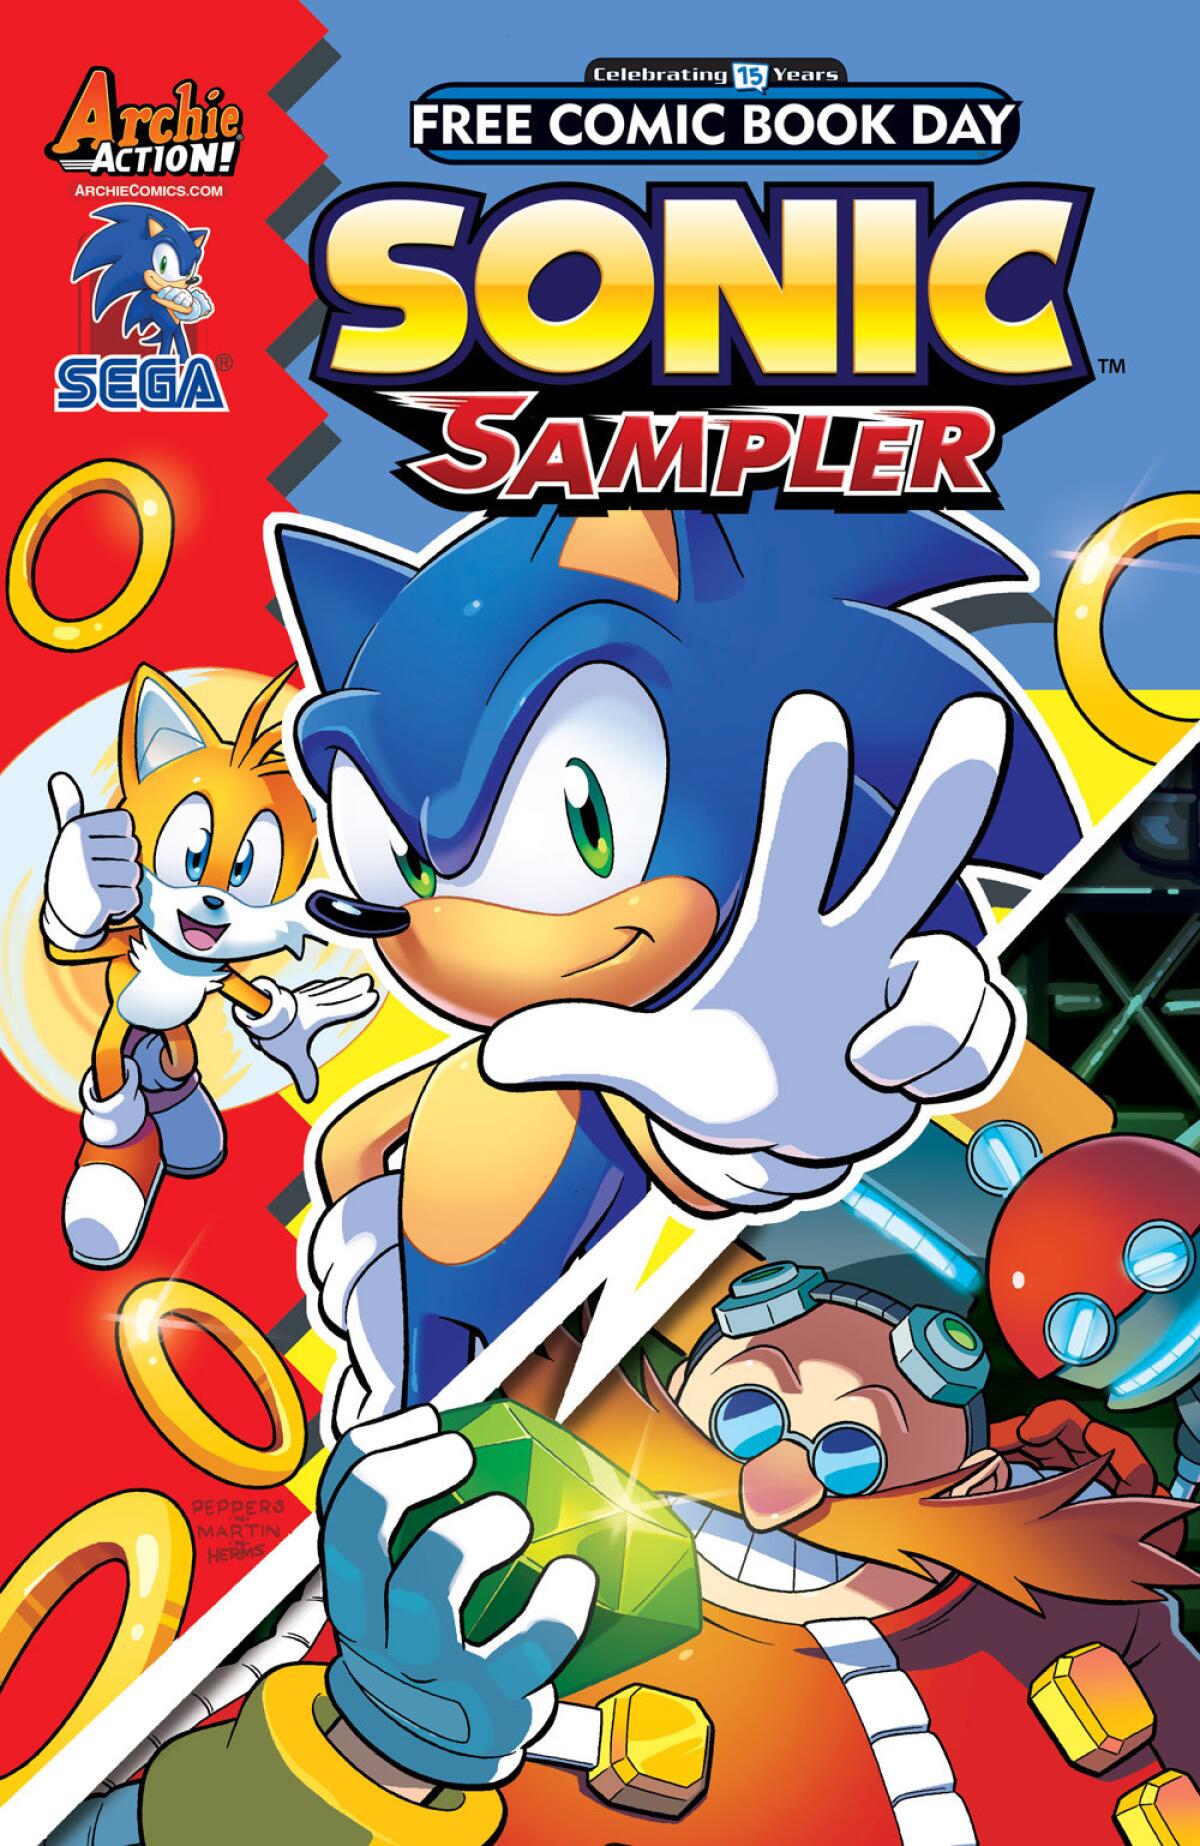 "Sonic" sampler with cover by Jamal Peppers and Gary Martin. (Archie Comics)